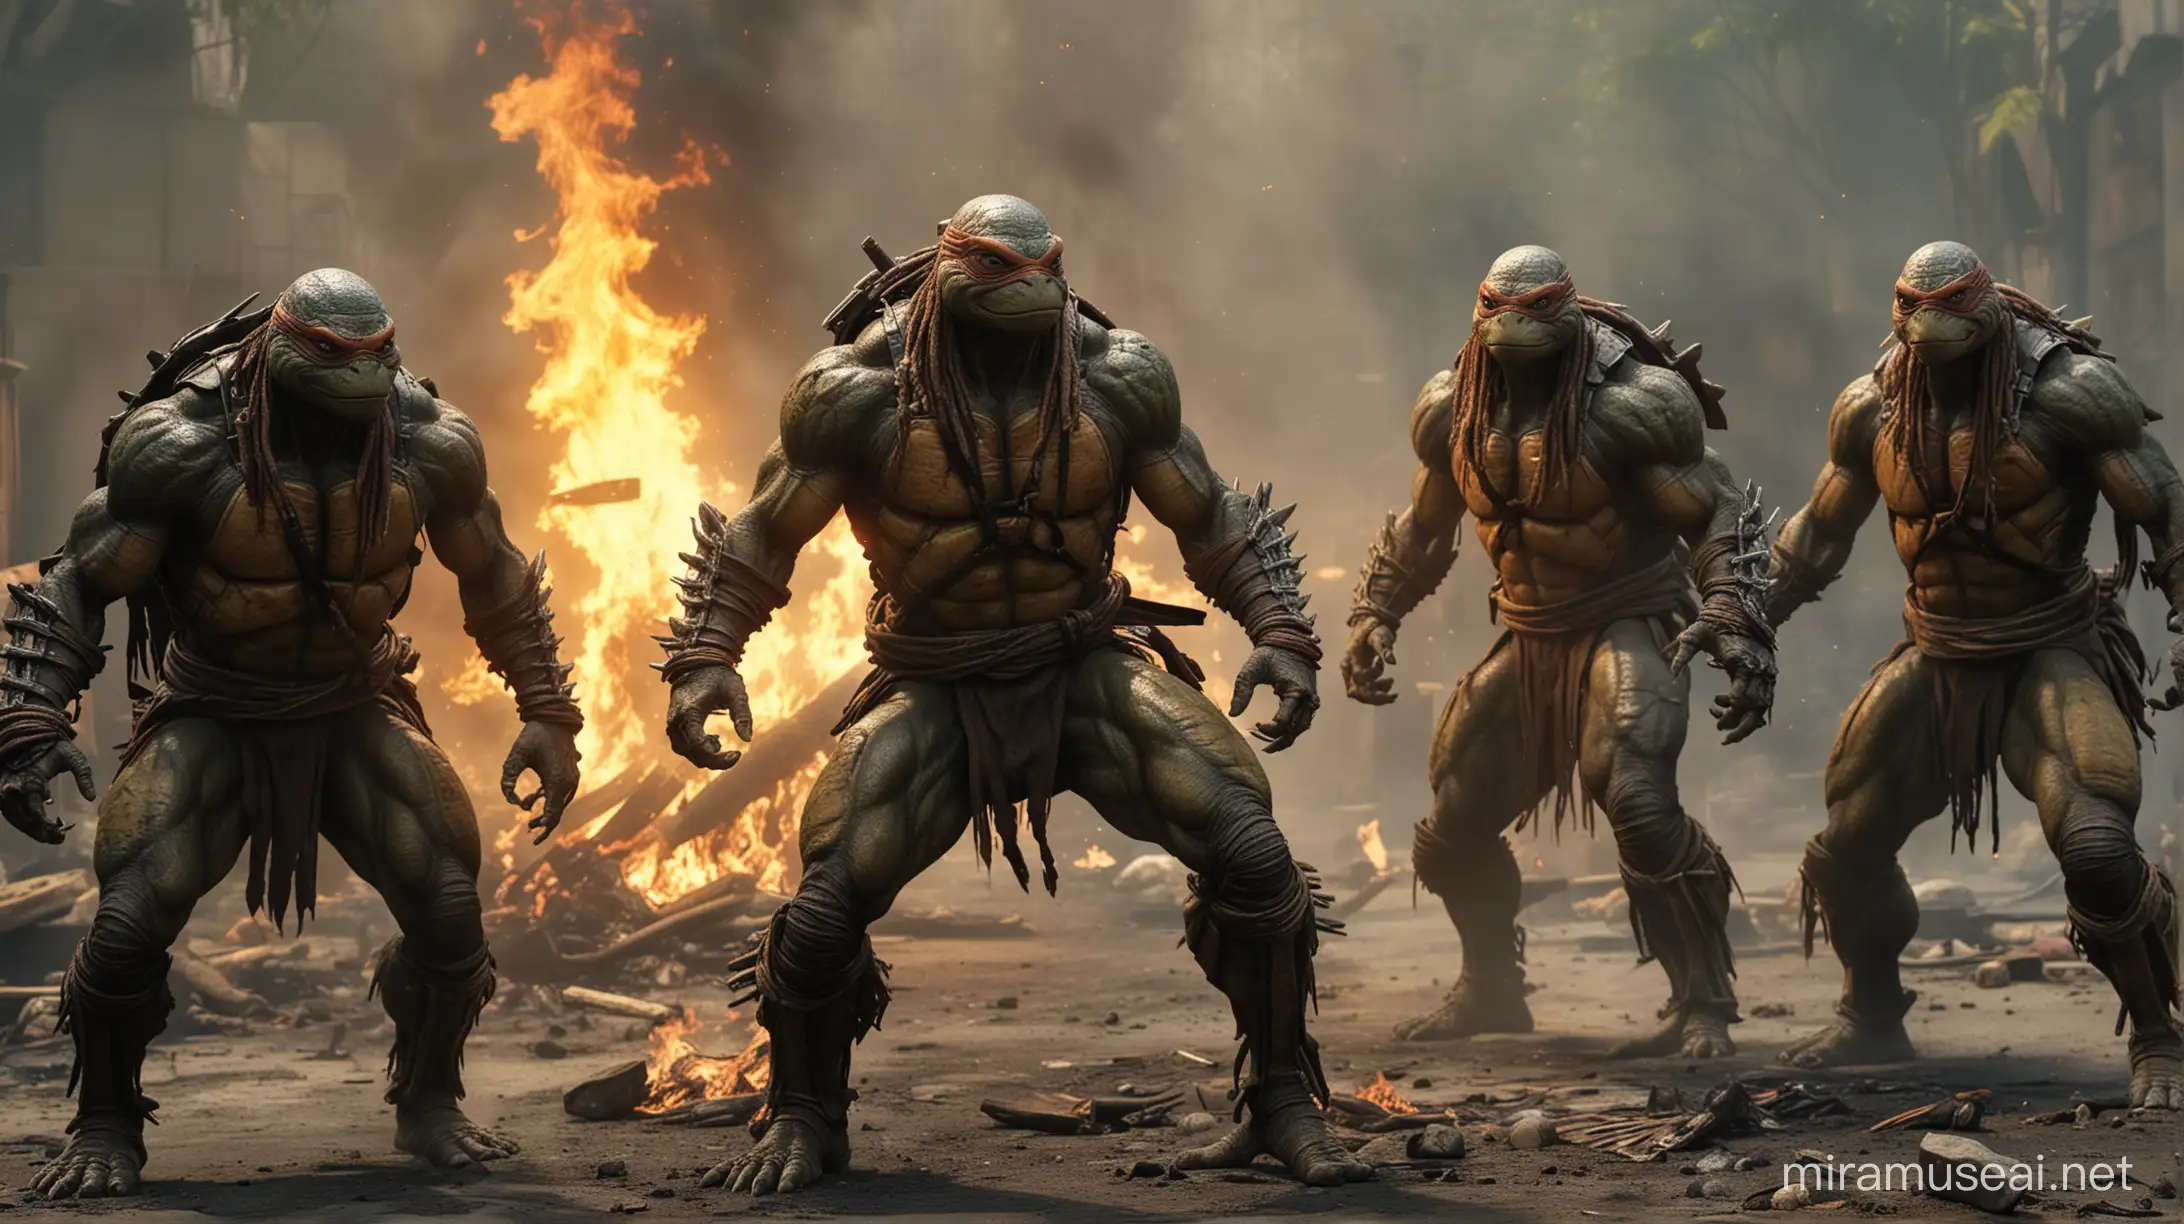 Four Ninja Turtles Emerge from Flames in Dynamic 3D UltraHighDetail Action Scene